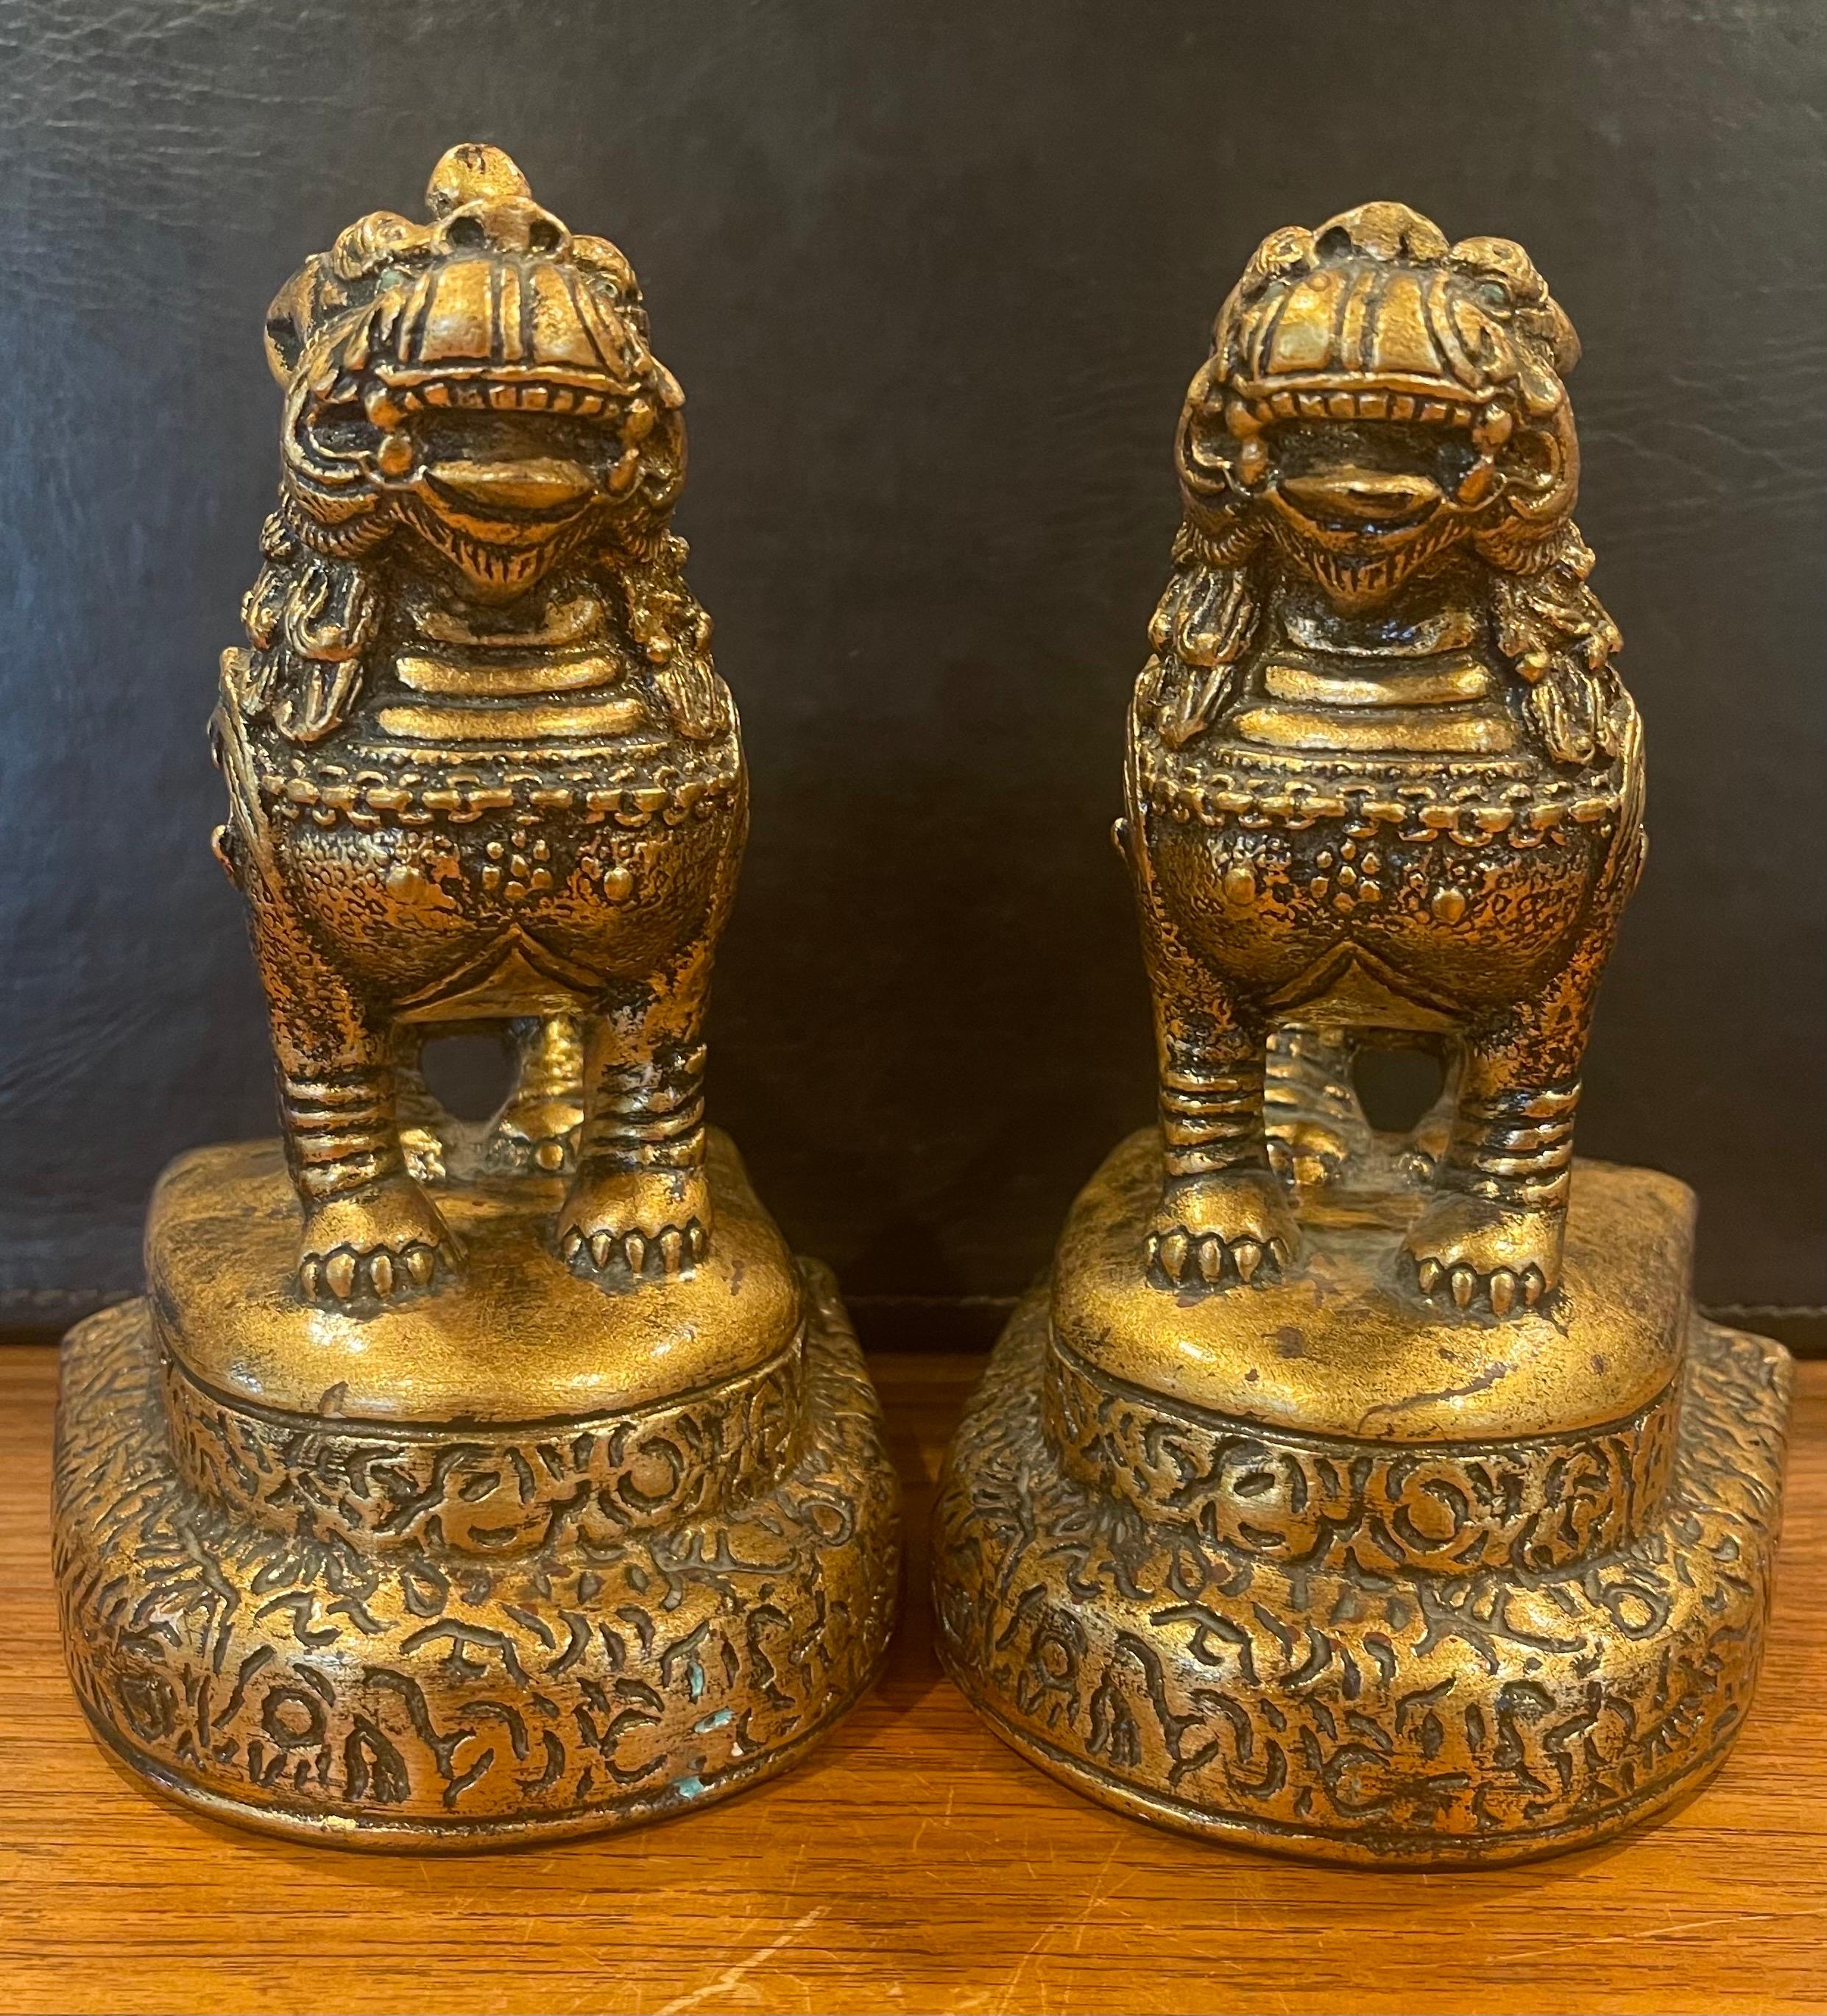 Hand-Crafted Pair of Mid-Century Gold Gilt Foo Dog Bookends by Jaru of California